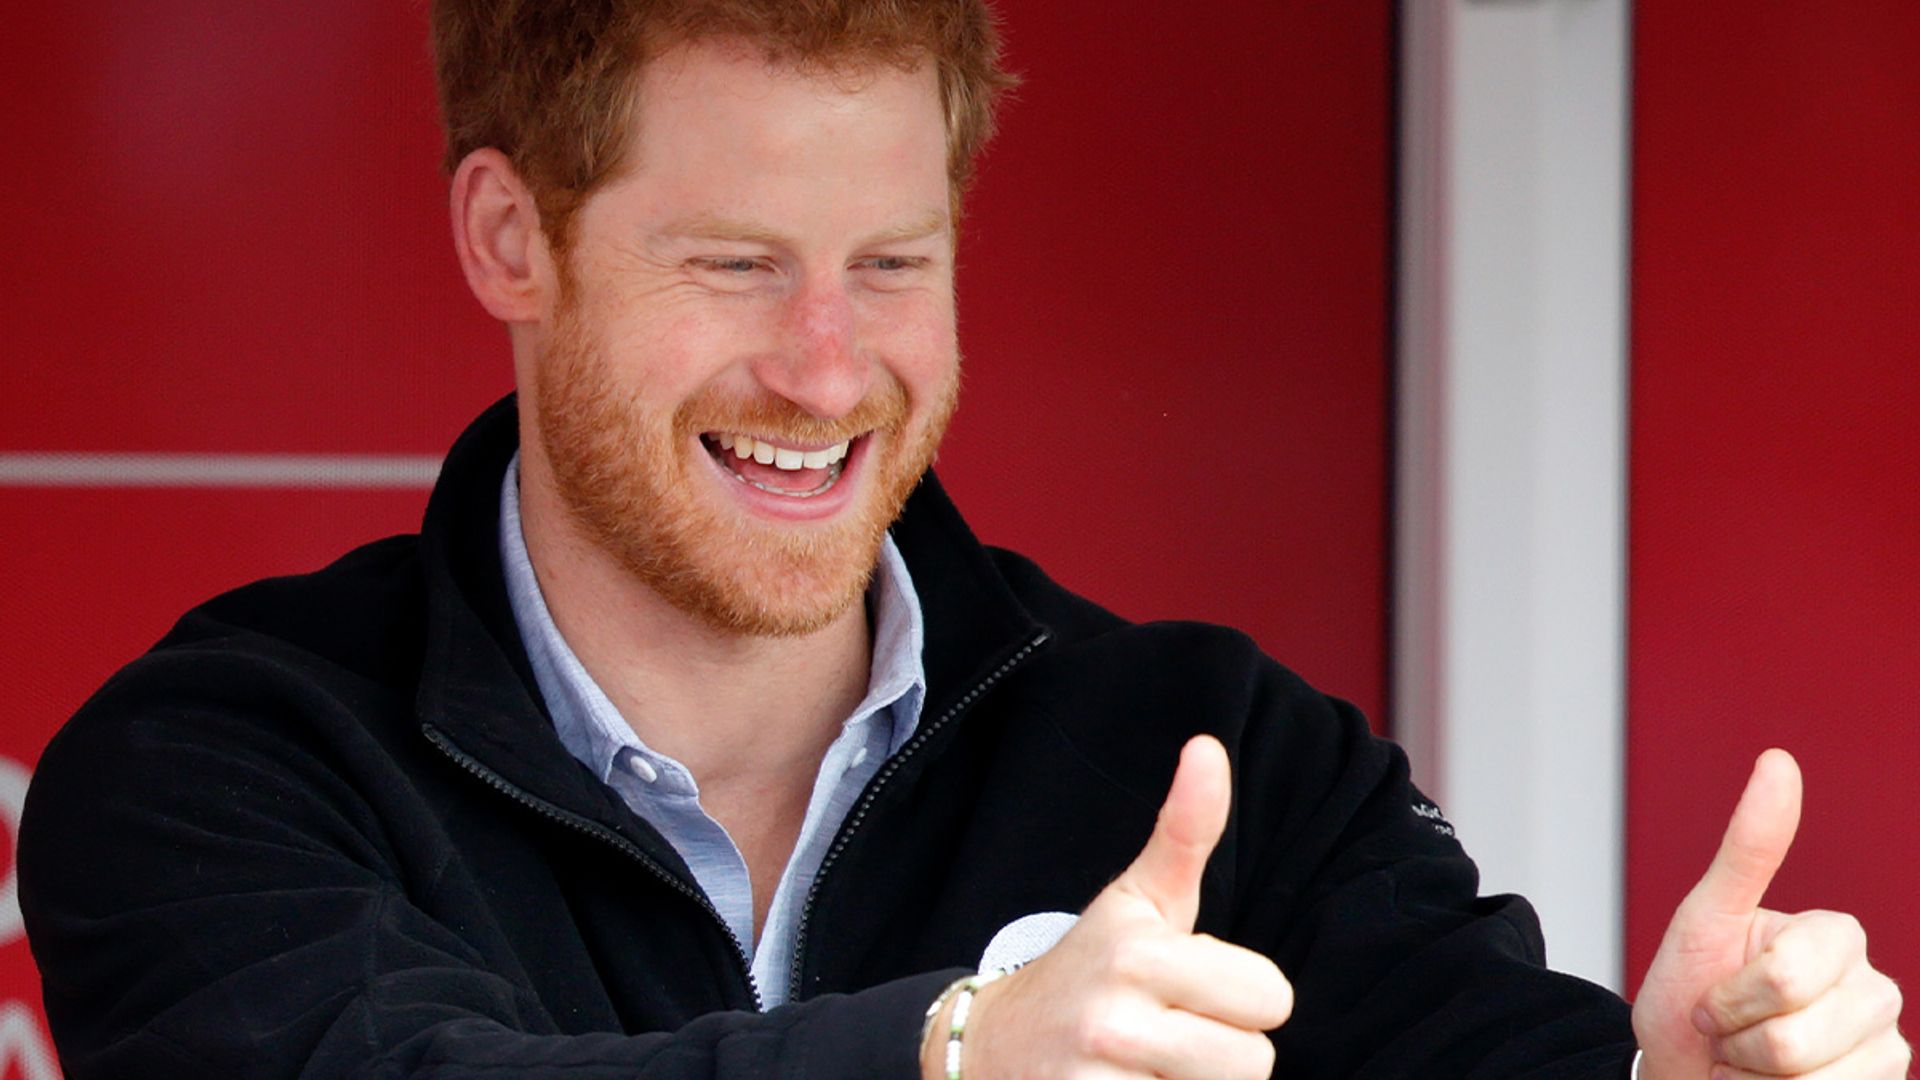 Prince Harry's former bachelor pad might surprise you - details